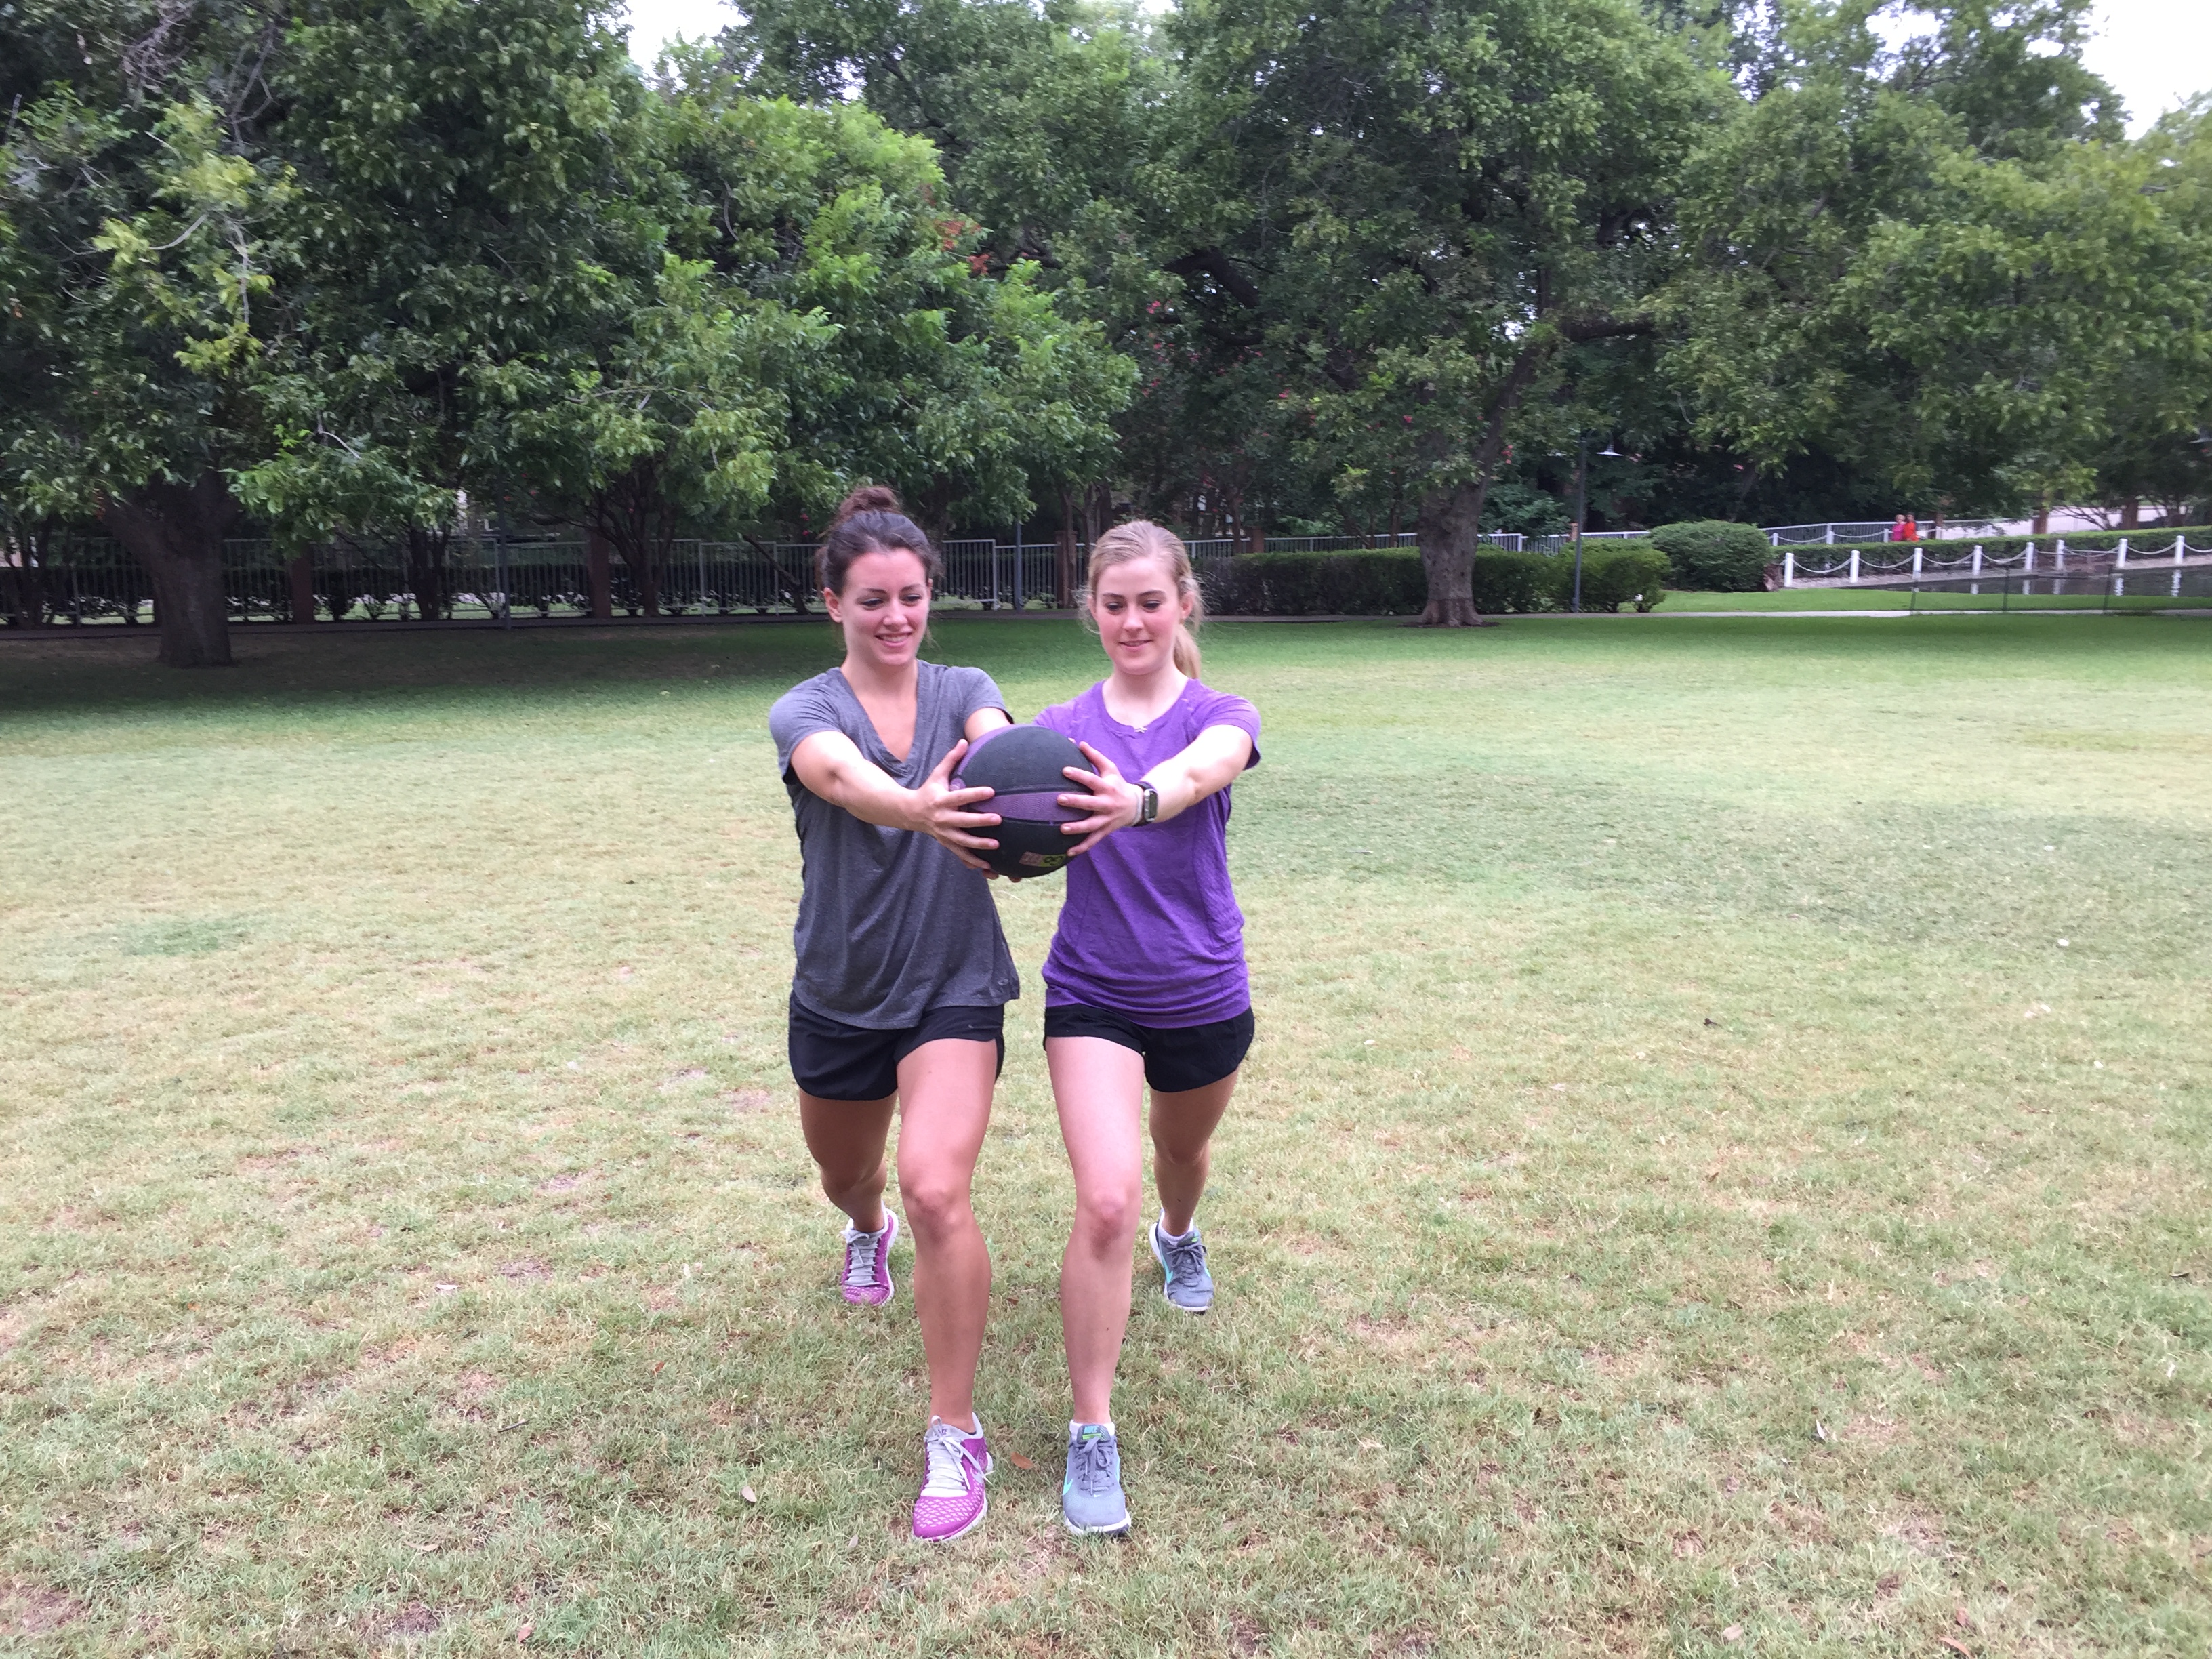 Two women doing a lunge stance/rotational ball pass